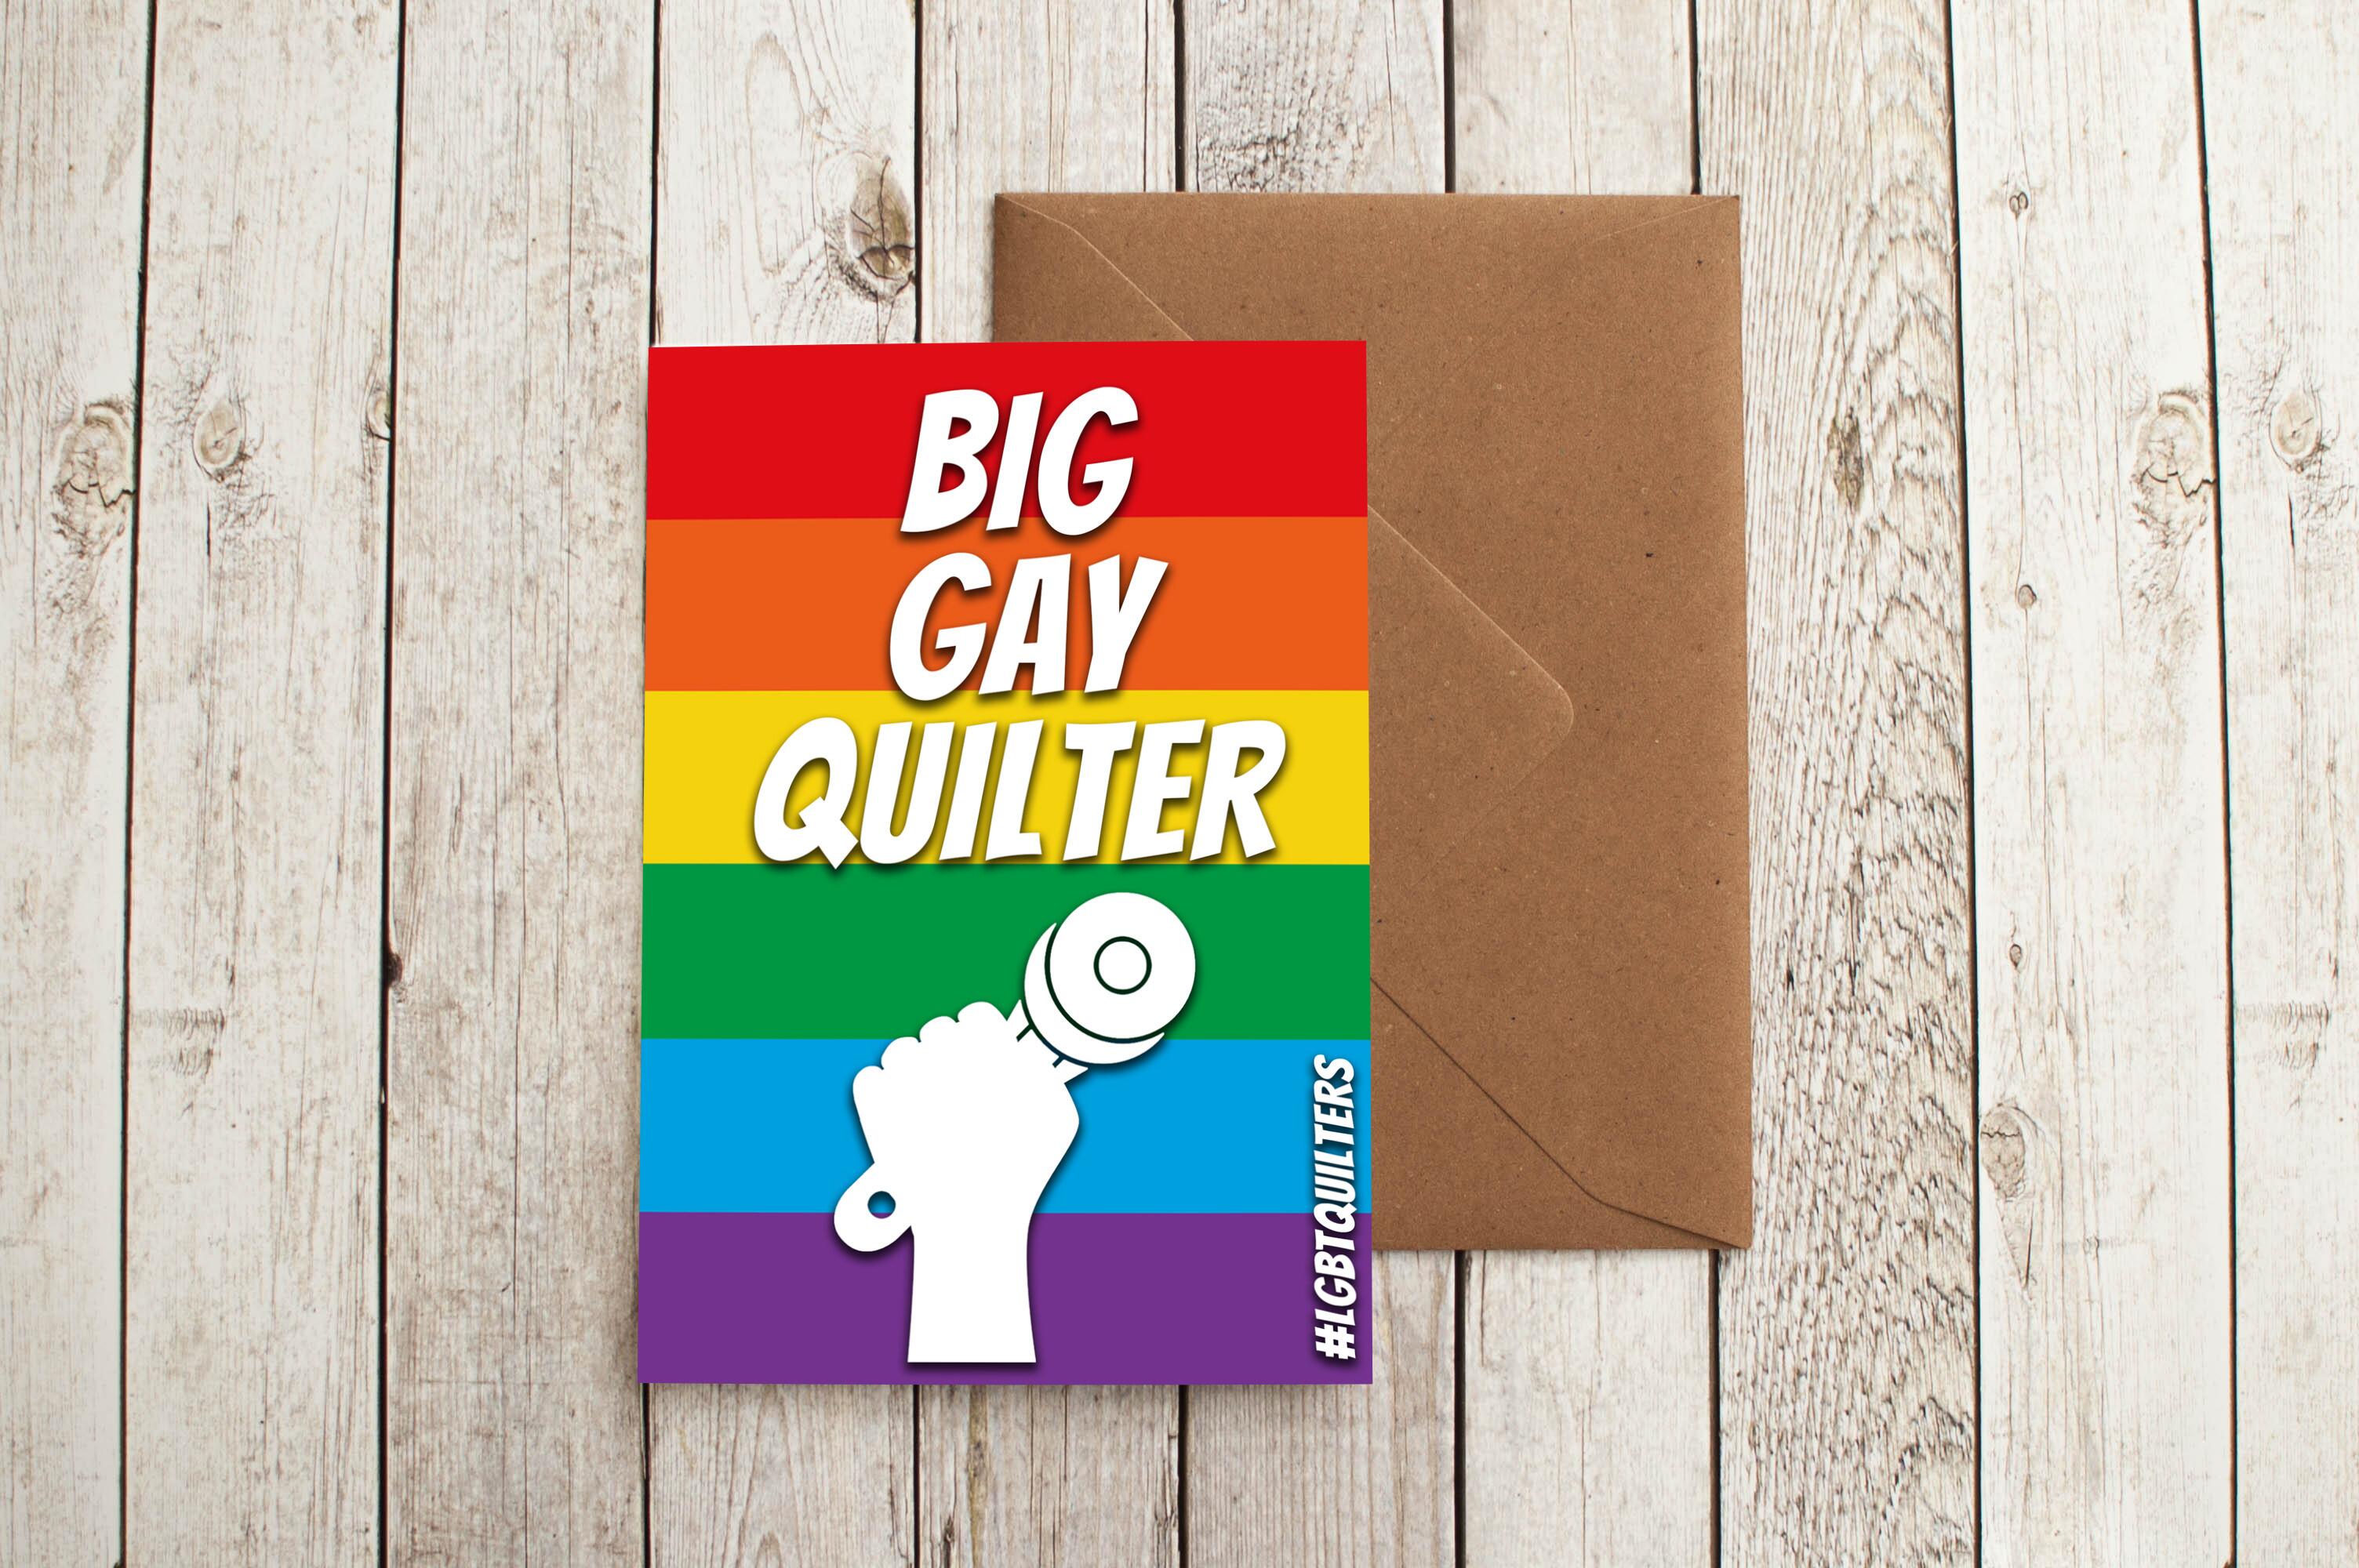 LGBTQ, queer, sewing themed birthday card, quilting card, greetings card, uk sewing birthday cards, sewing themed card, quilting themed card